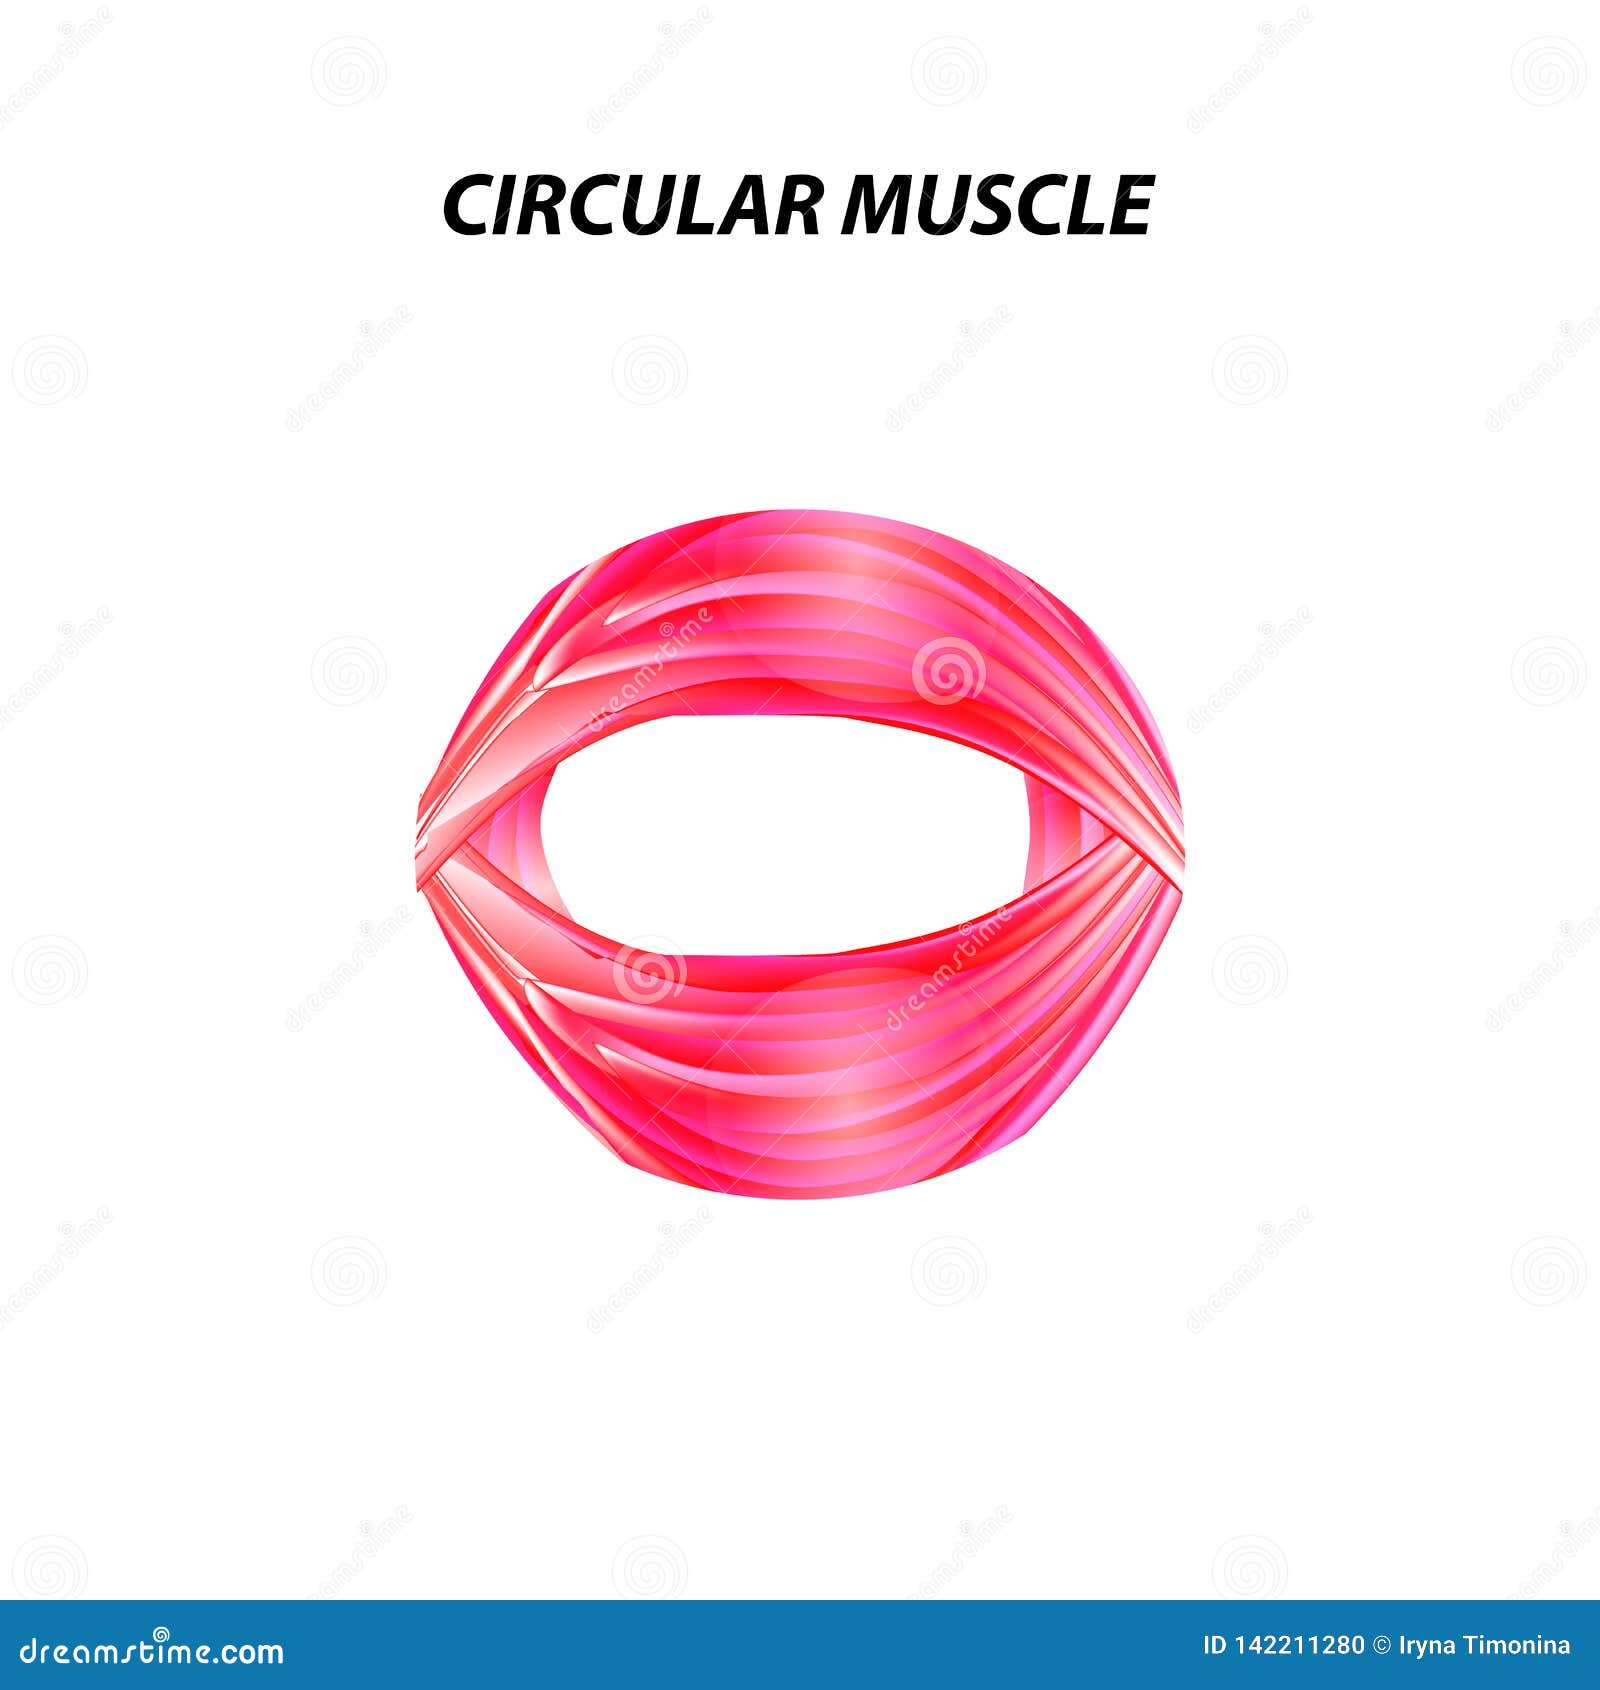 The Structure Of Skeletal Muscle. Circular Muscle. Tendon. Infographics